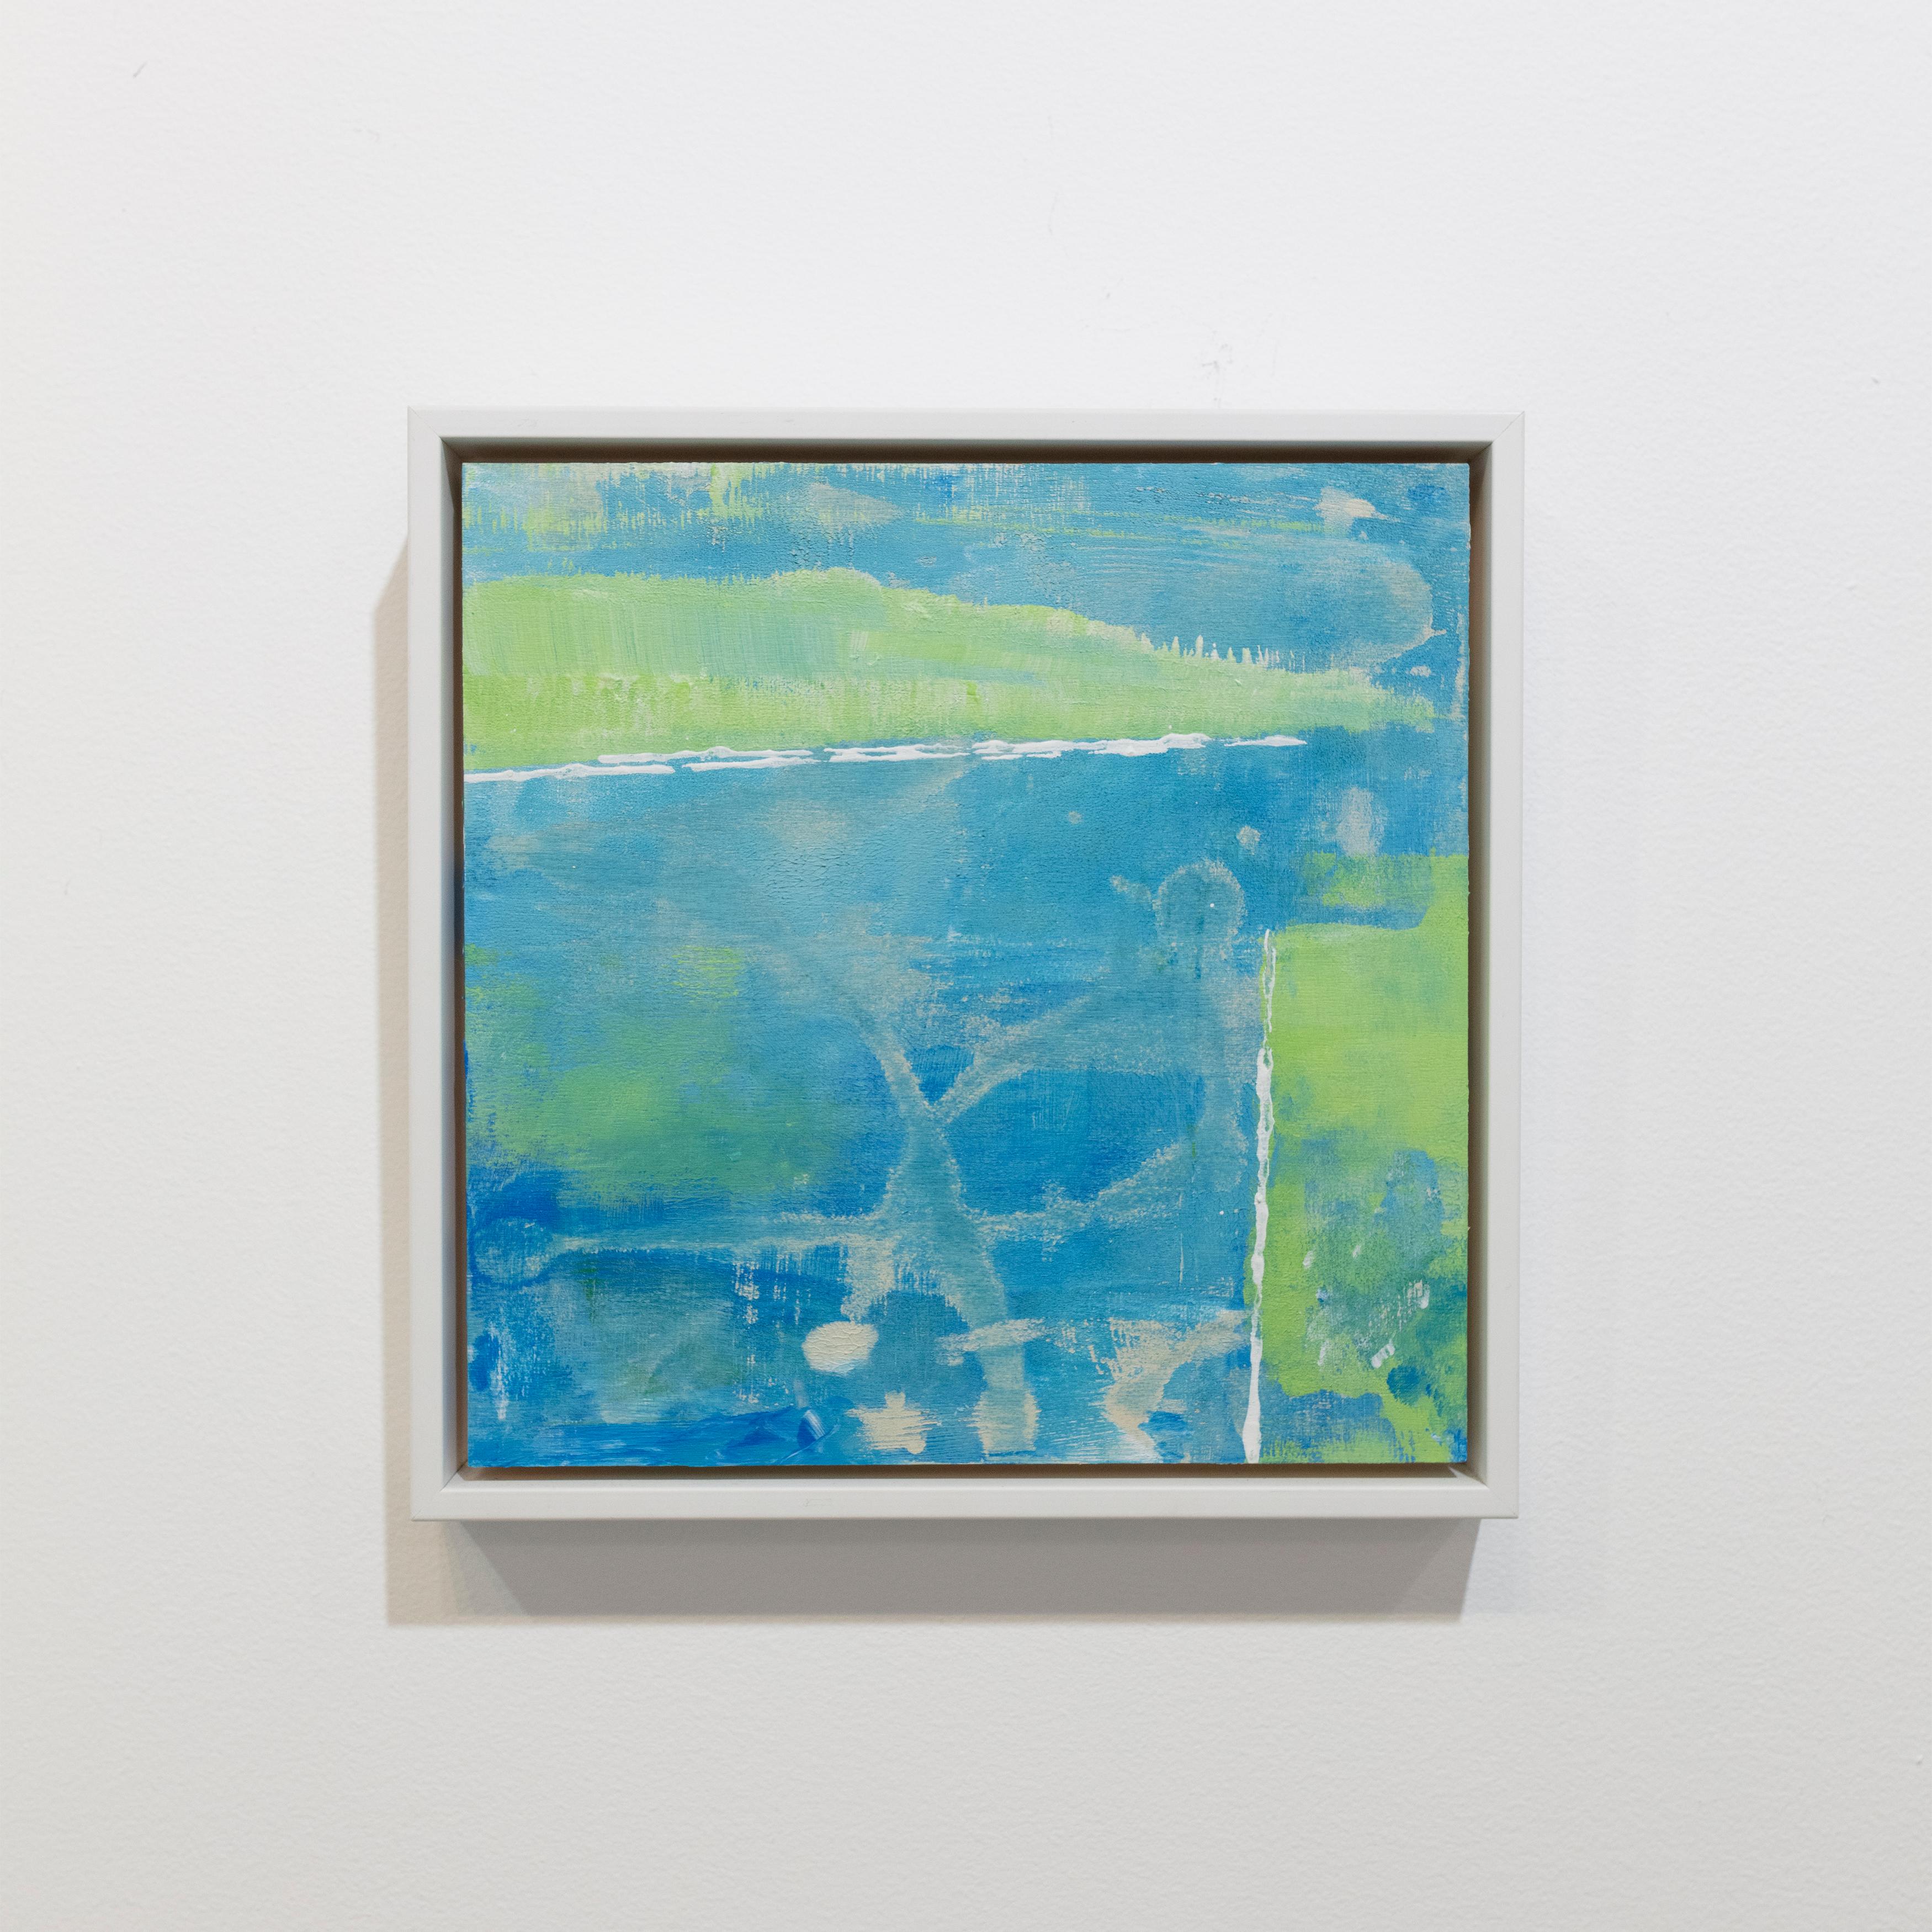 This small abstract painting by Sue De Chiara is made with acrylic paint on board. It features a blue, teal, and green palette and a layered, minimalist composition. The painting is professionally framed in a white floater frame. It measures 8" x